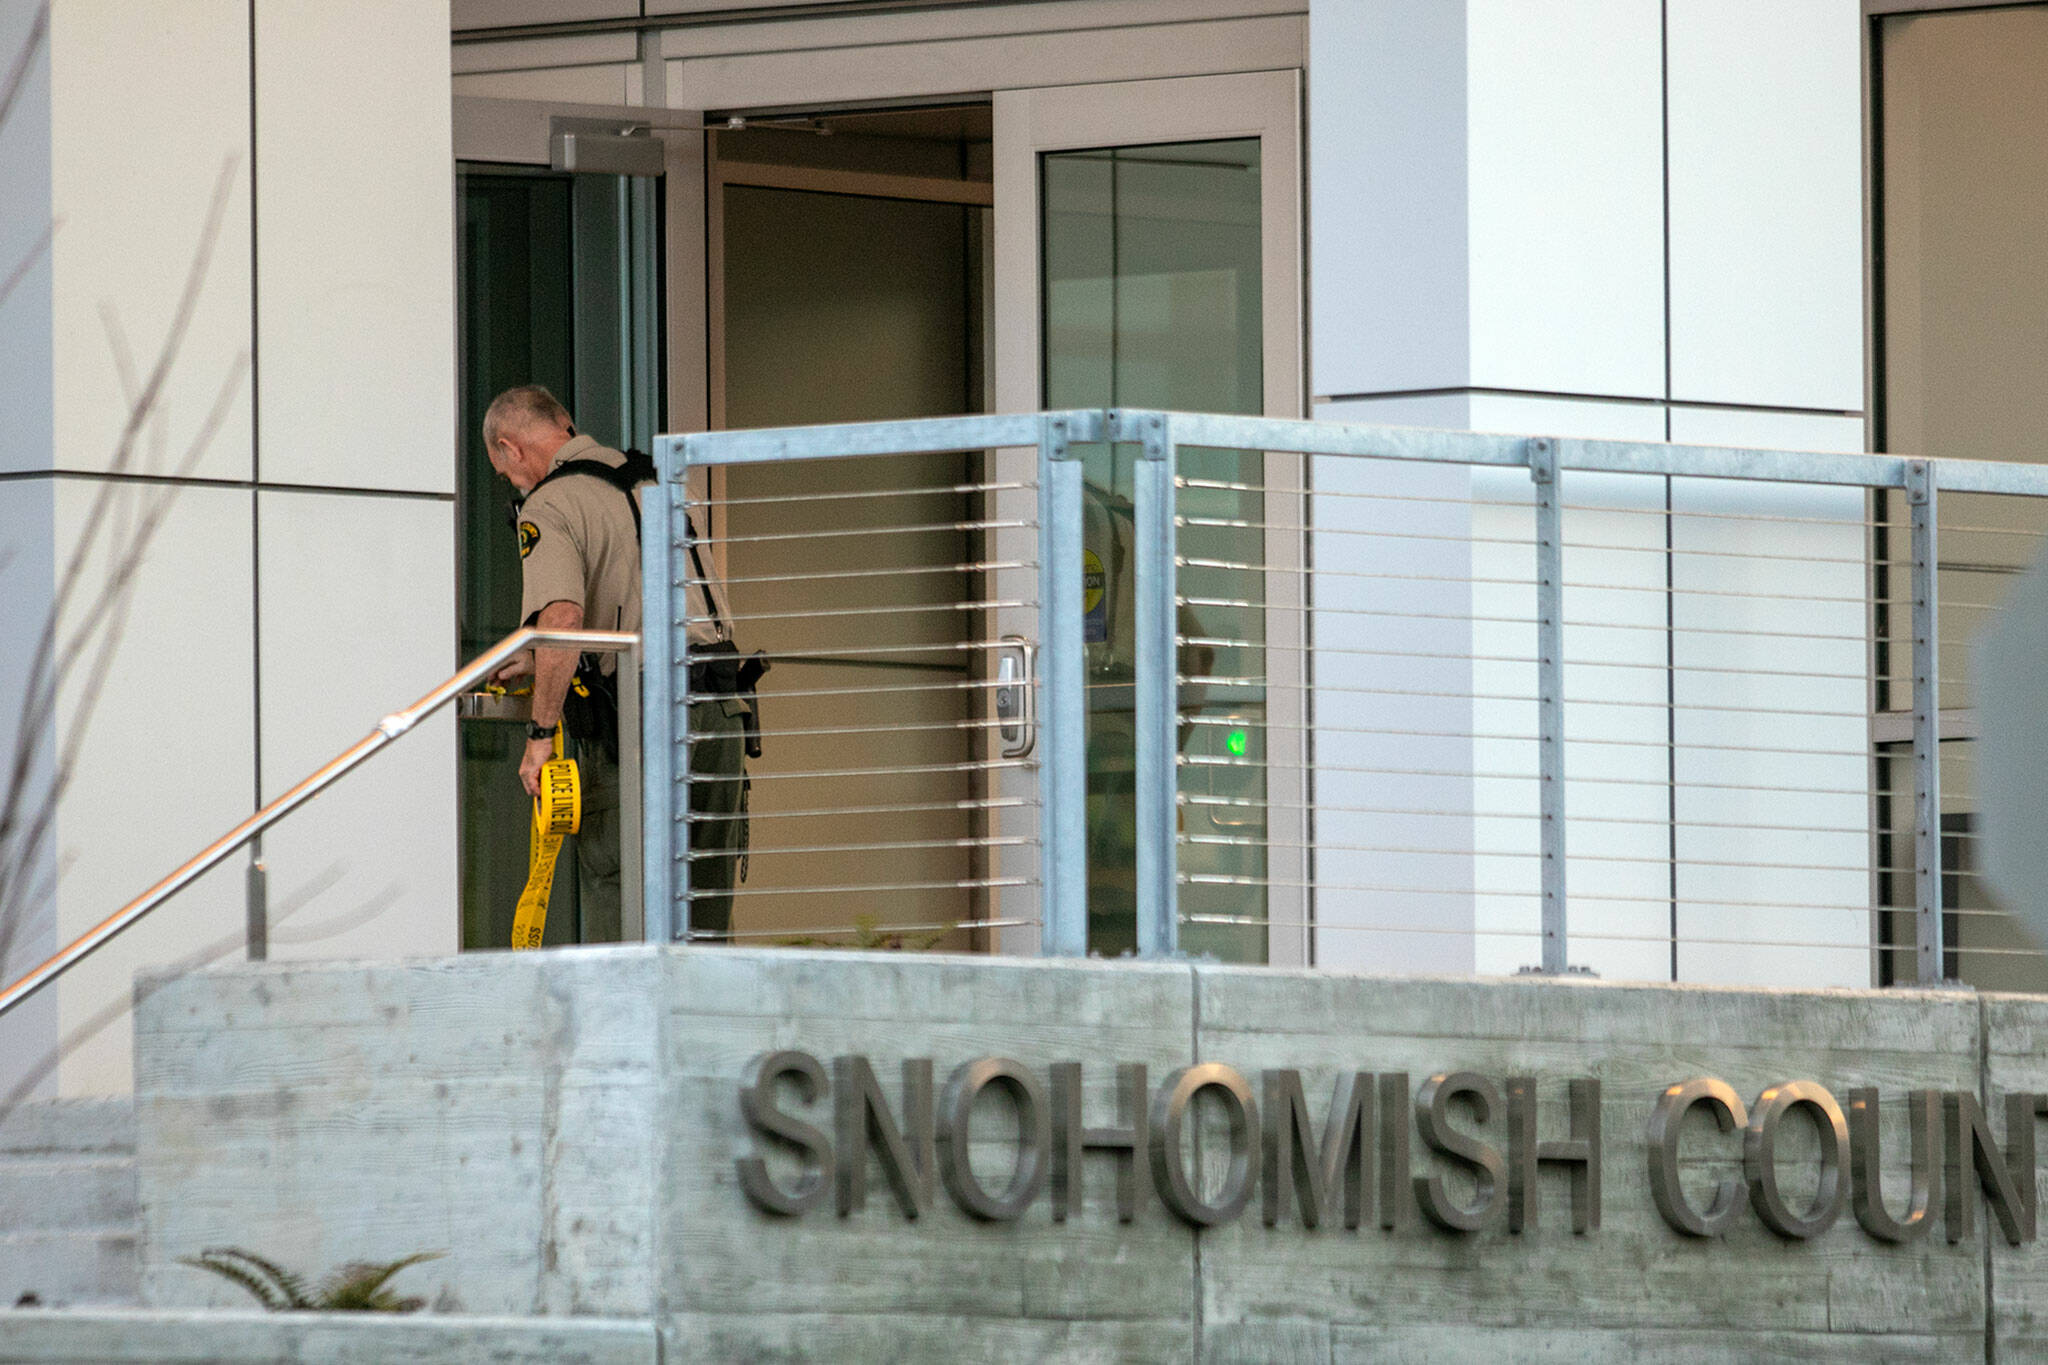 A member of the sheriff’s office puts up police tape at the Snohomish County Courthouse after an armed intruder forced a lockdown Monday, in downtown Everett. (Ryan Berry / The Herald)